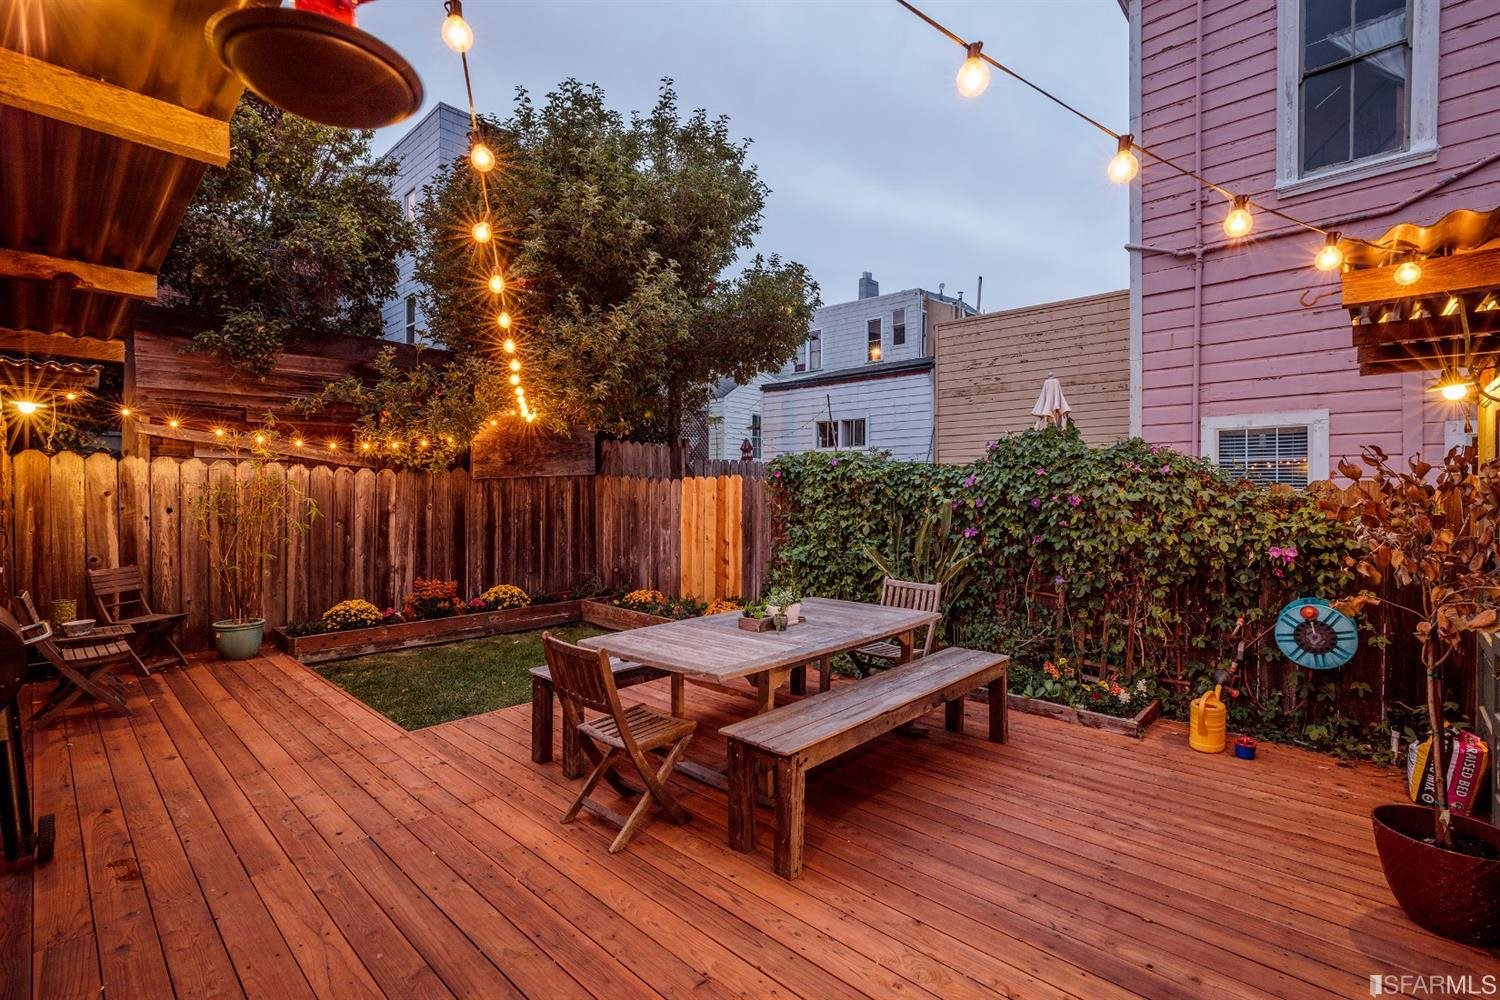 a view of a backyard with sitting area and wooden floor